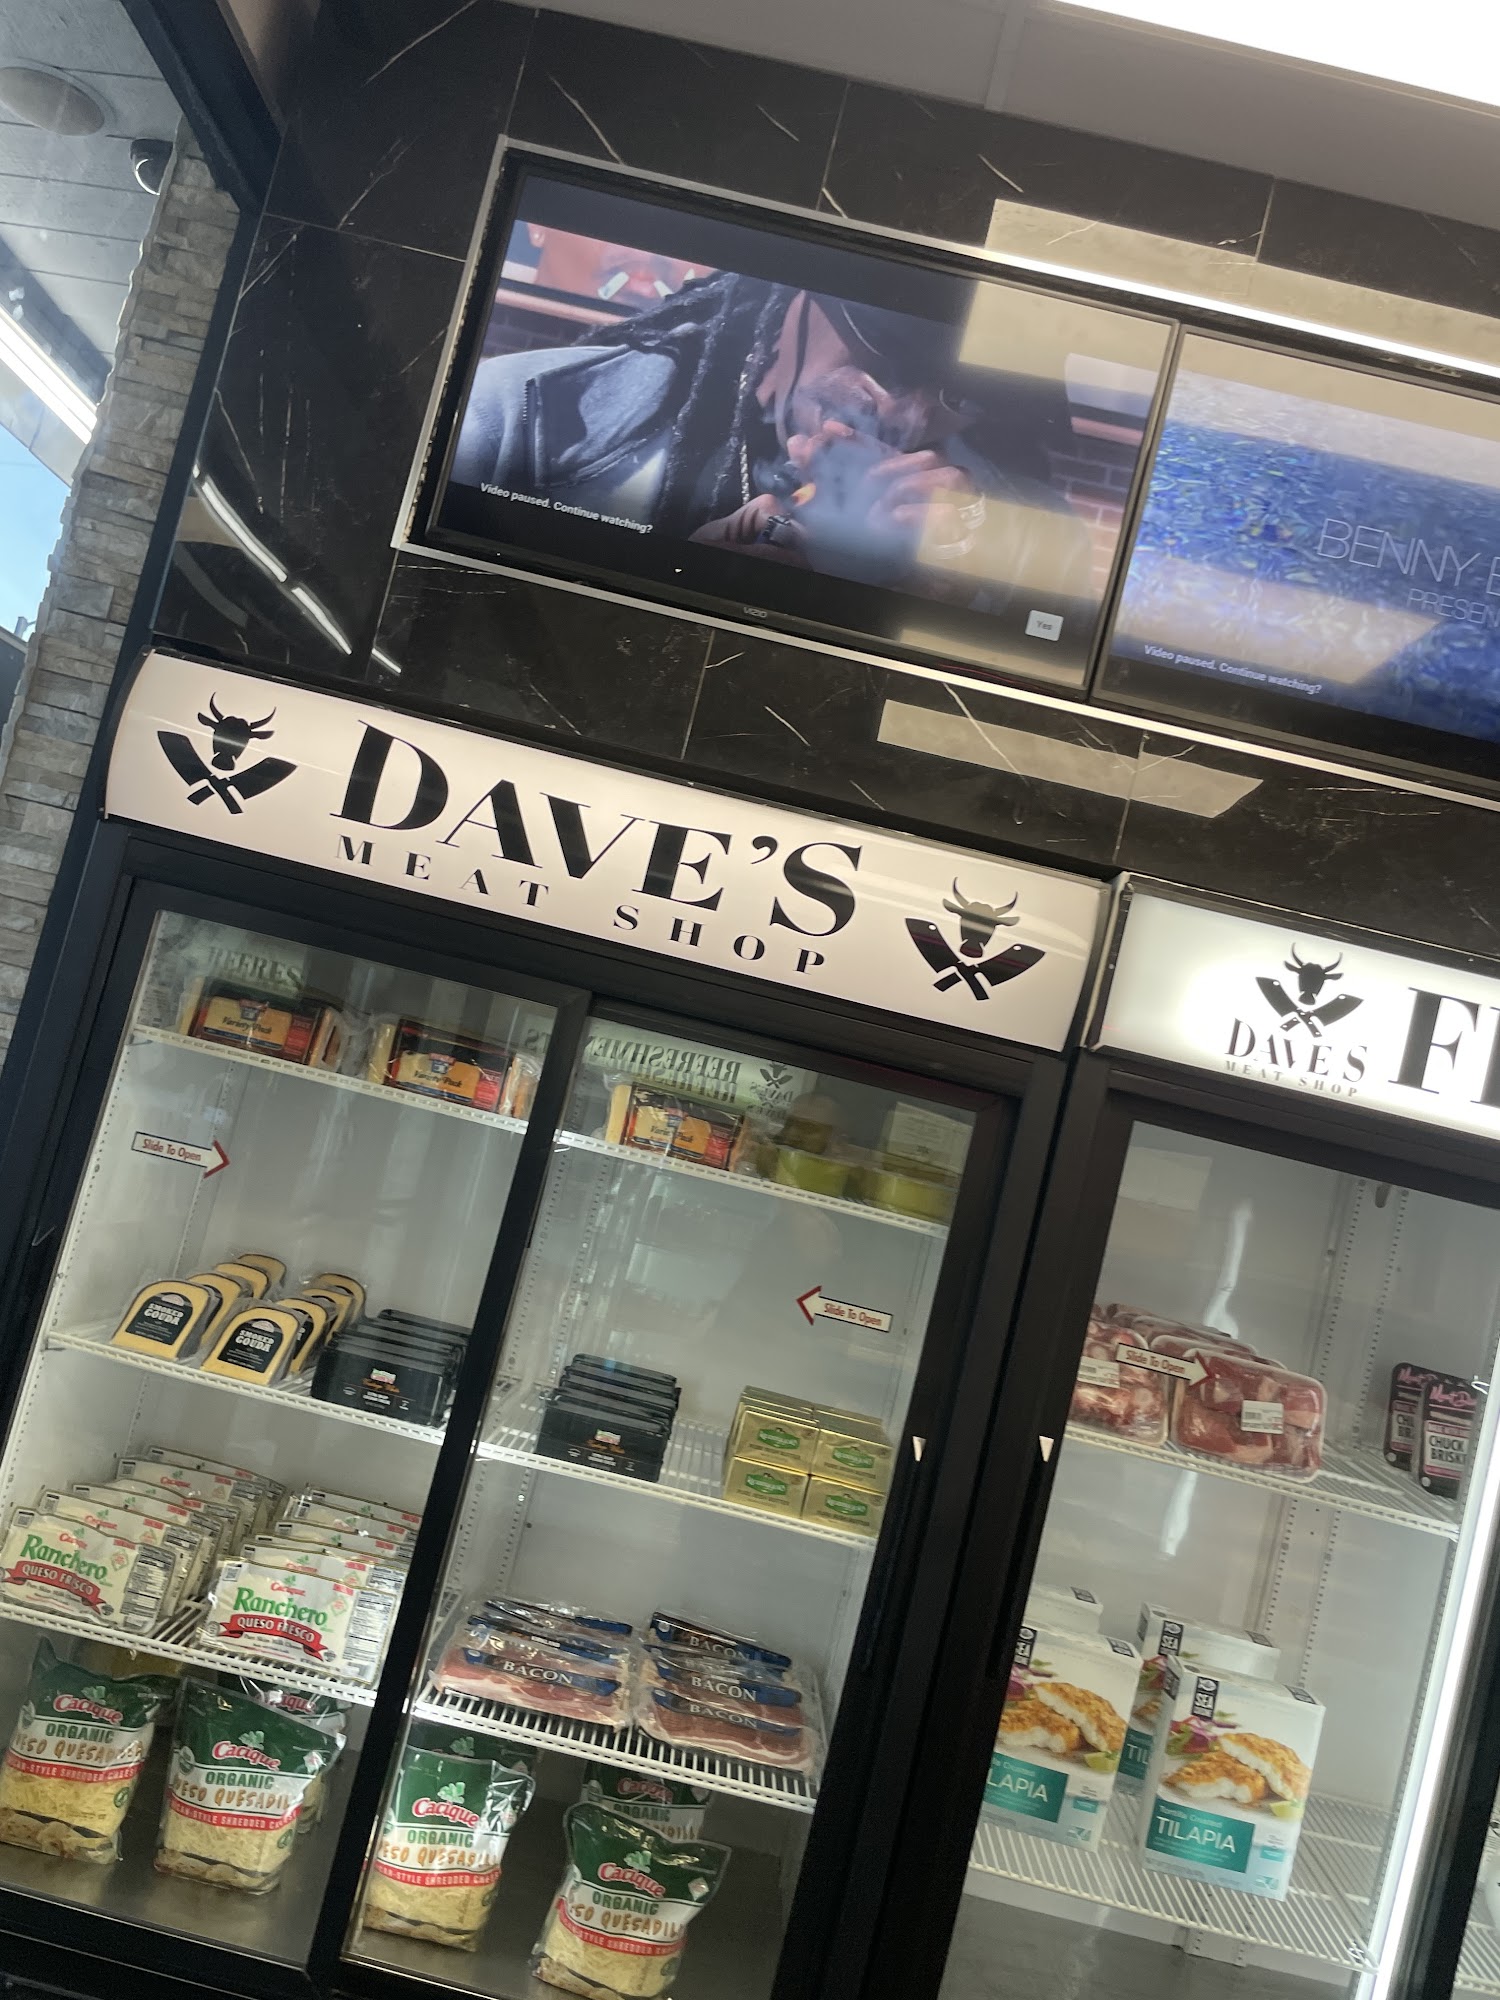 Dave's Meat Shop